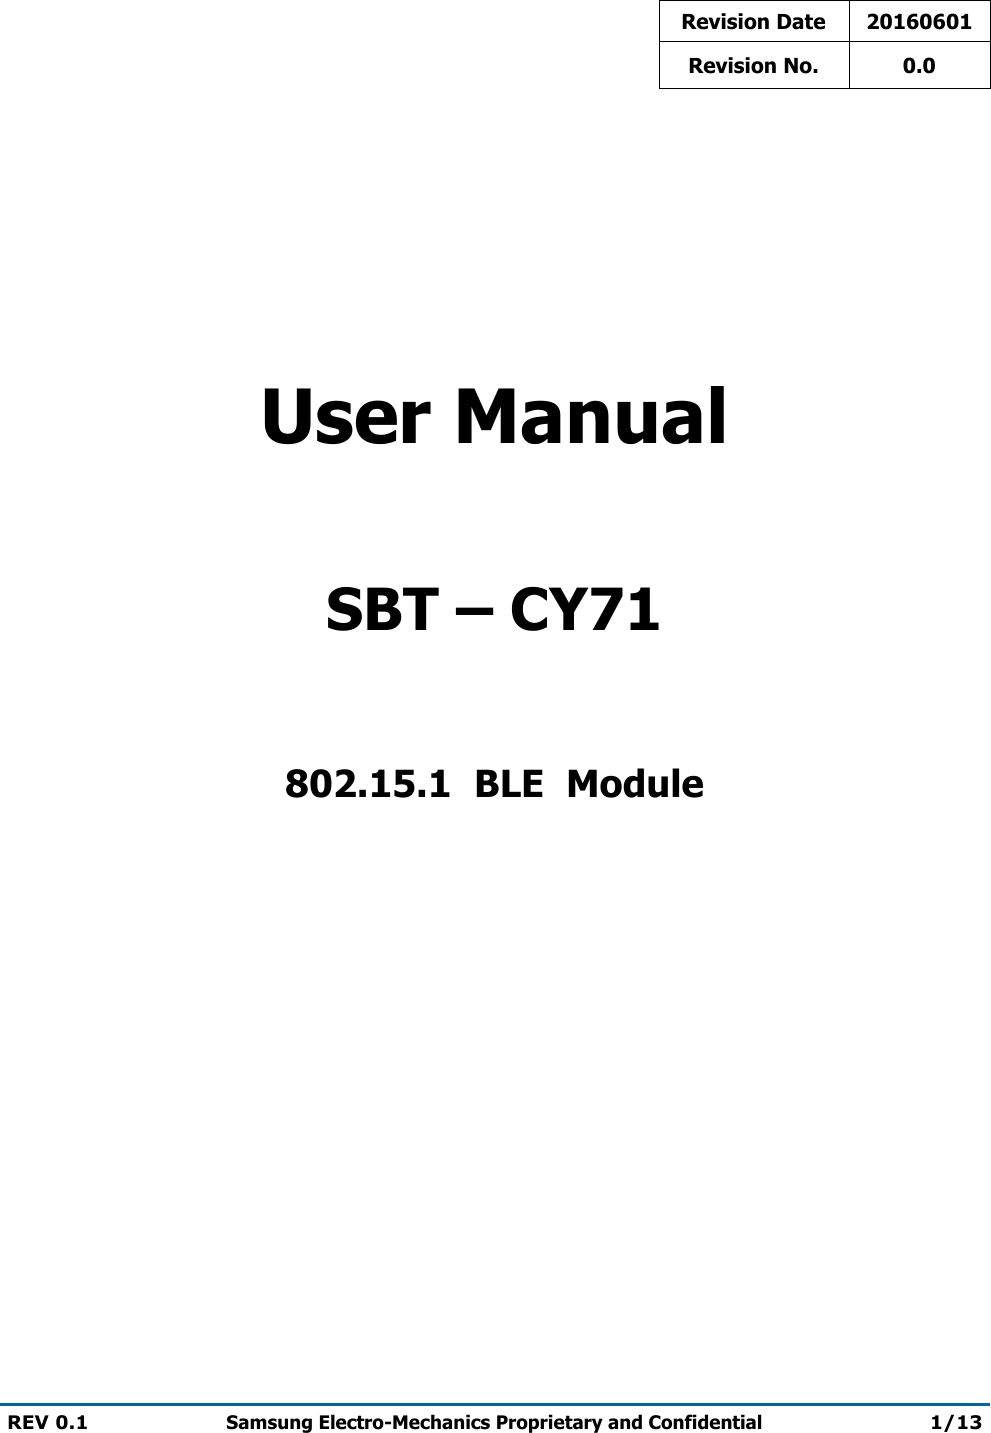 REV 0.1 Samsung Electro-Mechanics Proprietary and Confidential 1/13  Revision Date 20160601 Revision No. 0.0     User Manual  SBT – CY71  802.15.1  BLE  Module                